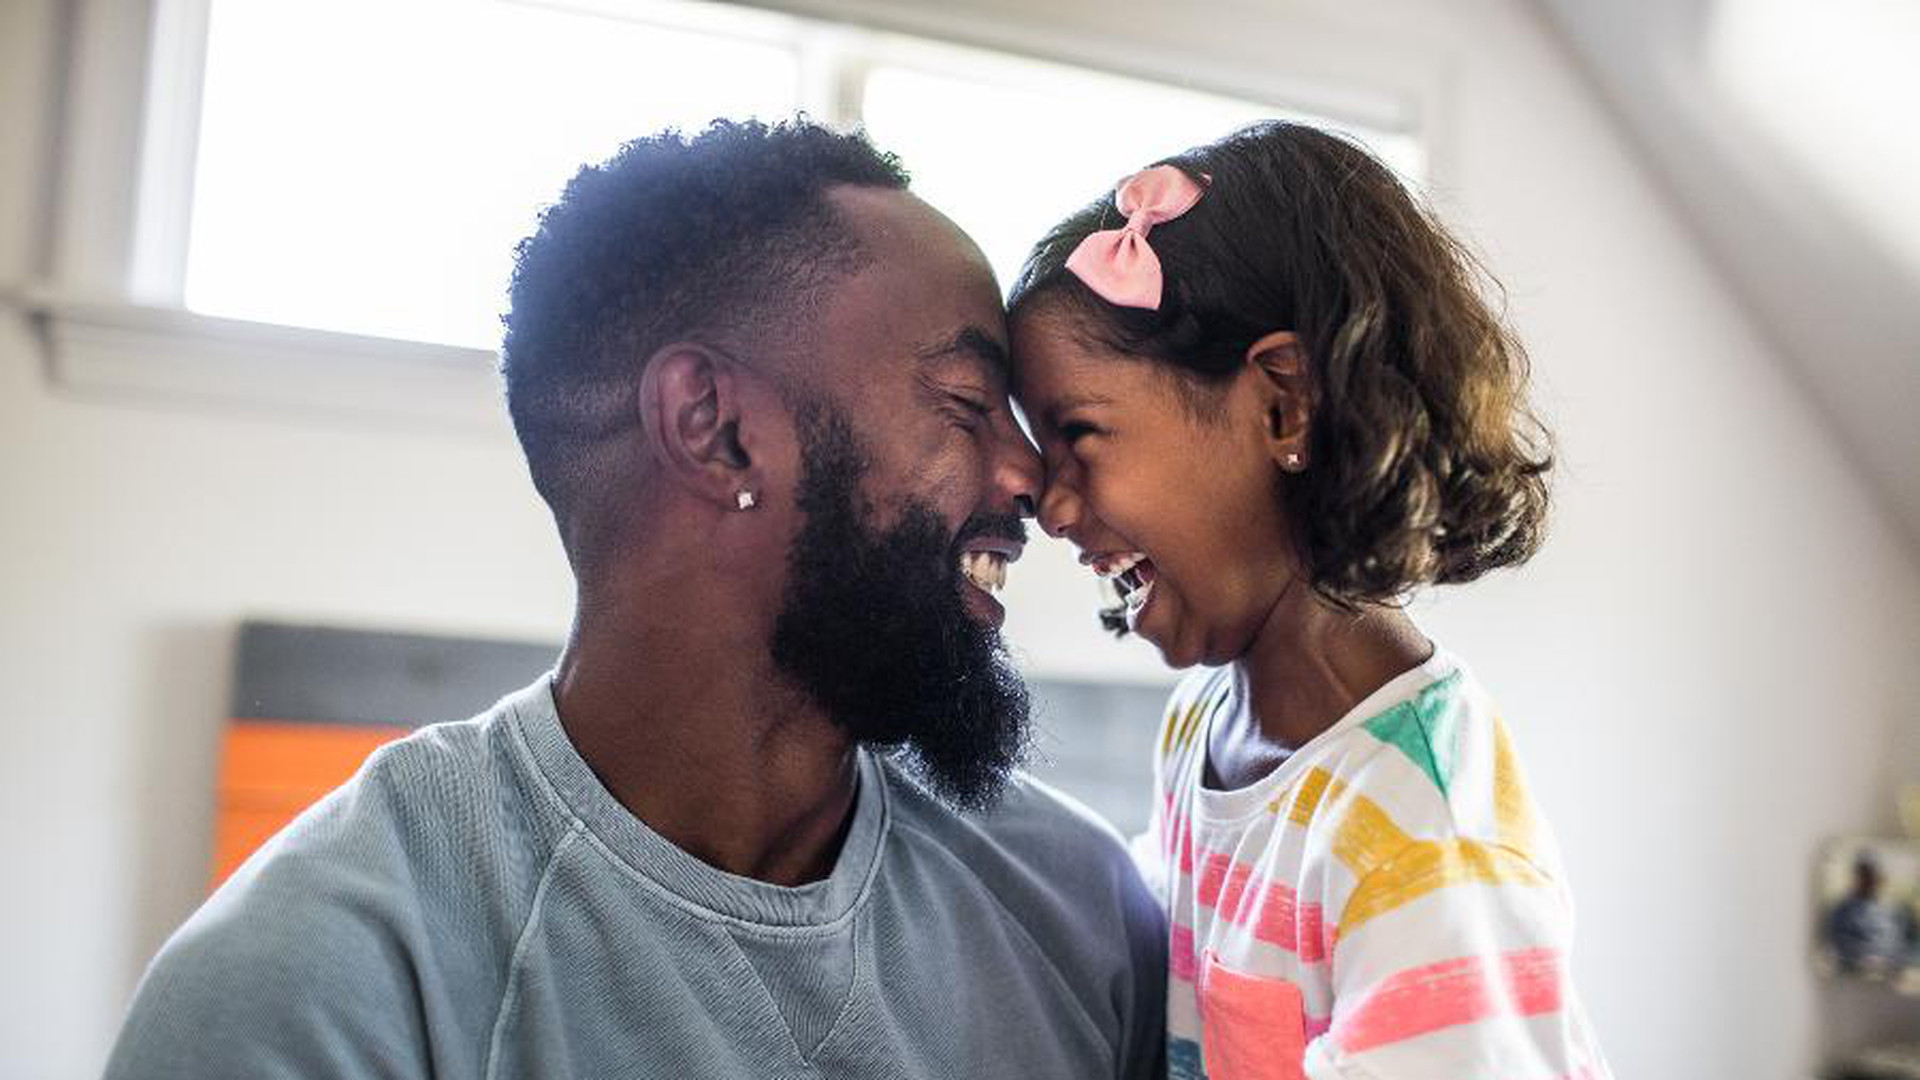 Why We Need To Shift Narratives About Fatherhood